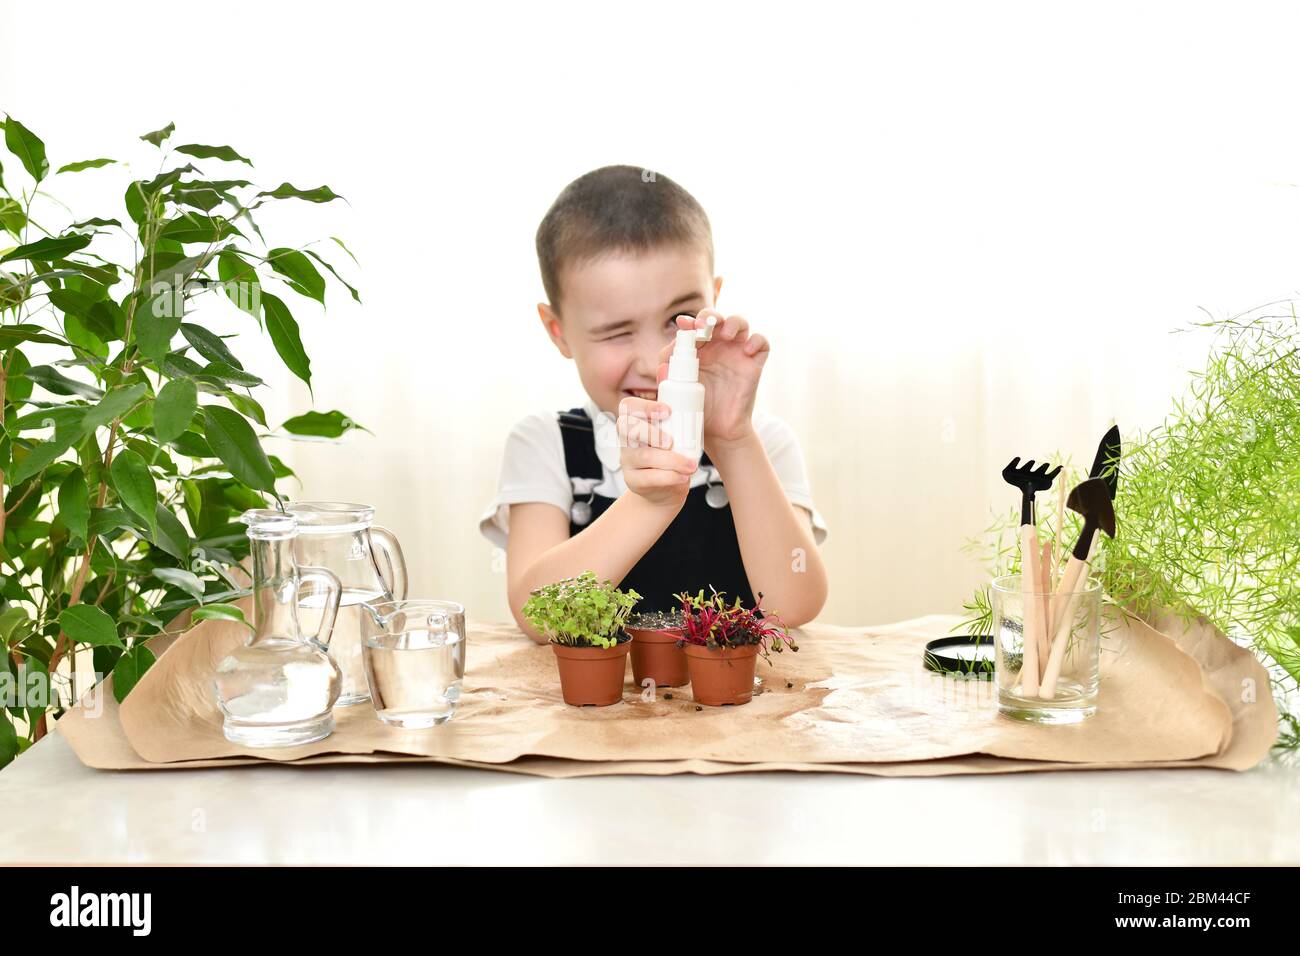 The child cares for sprouted plants in pots. Fun, splashing water in front of him takes aim and squinted one eye. Stock Photo